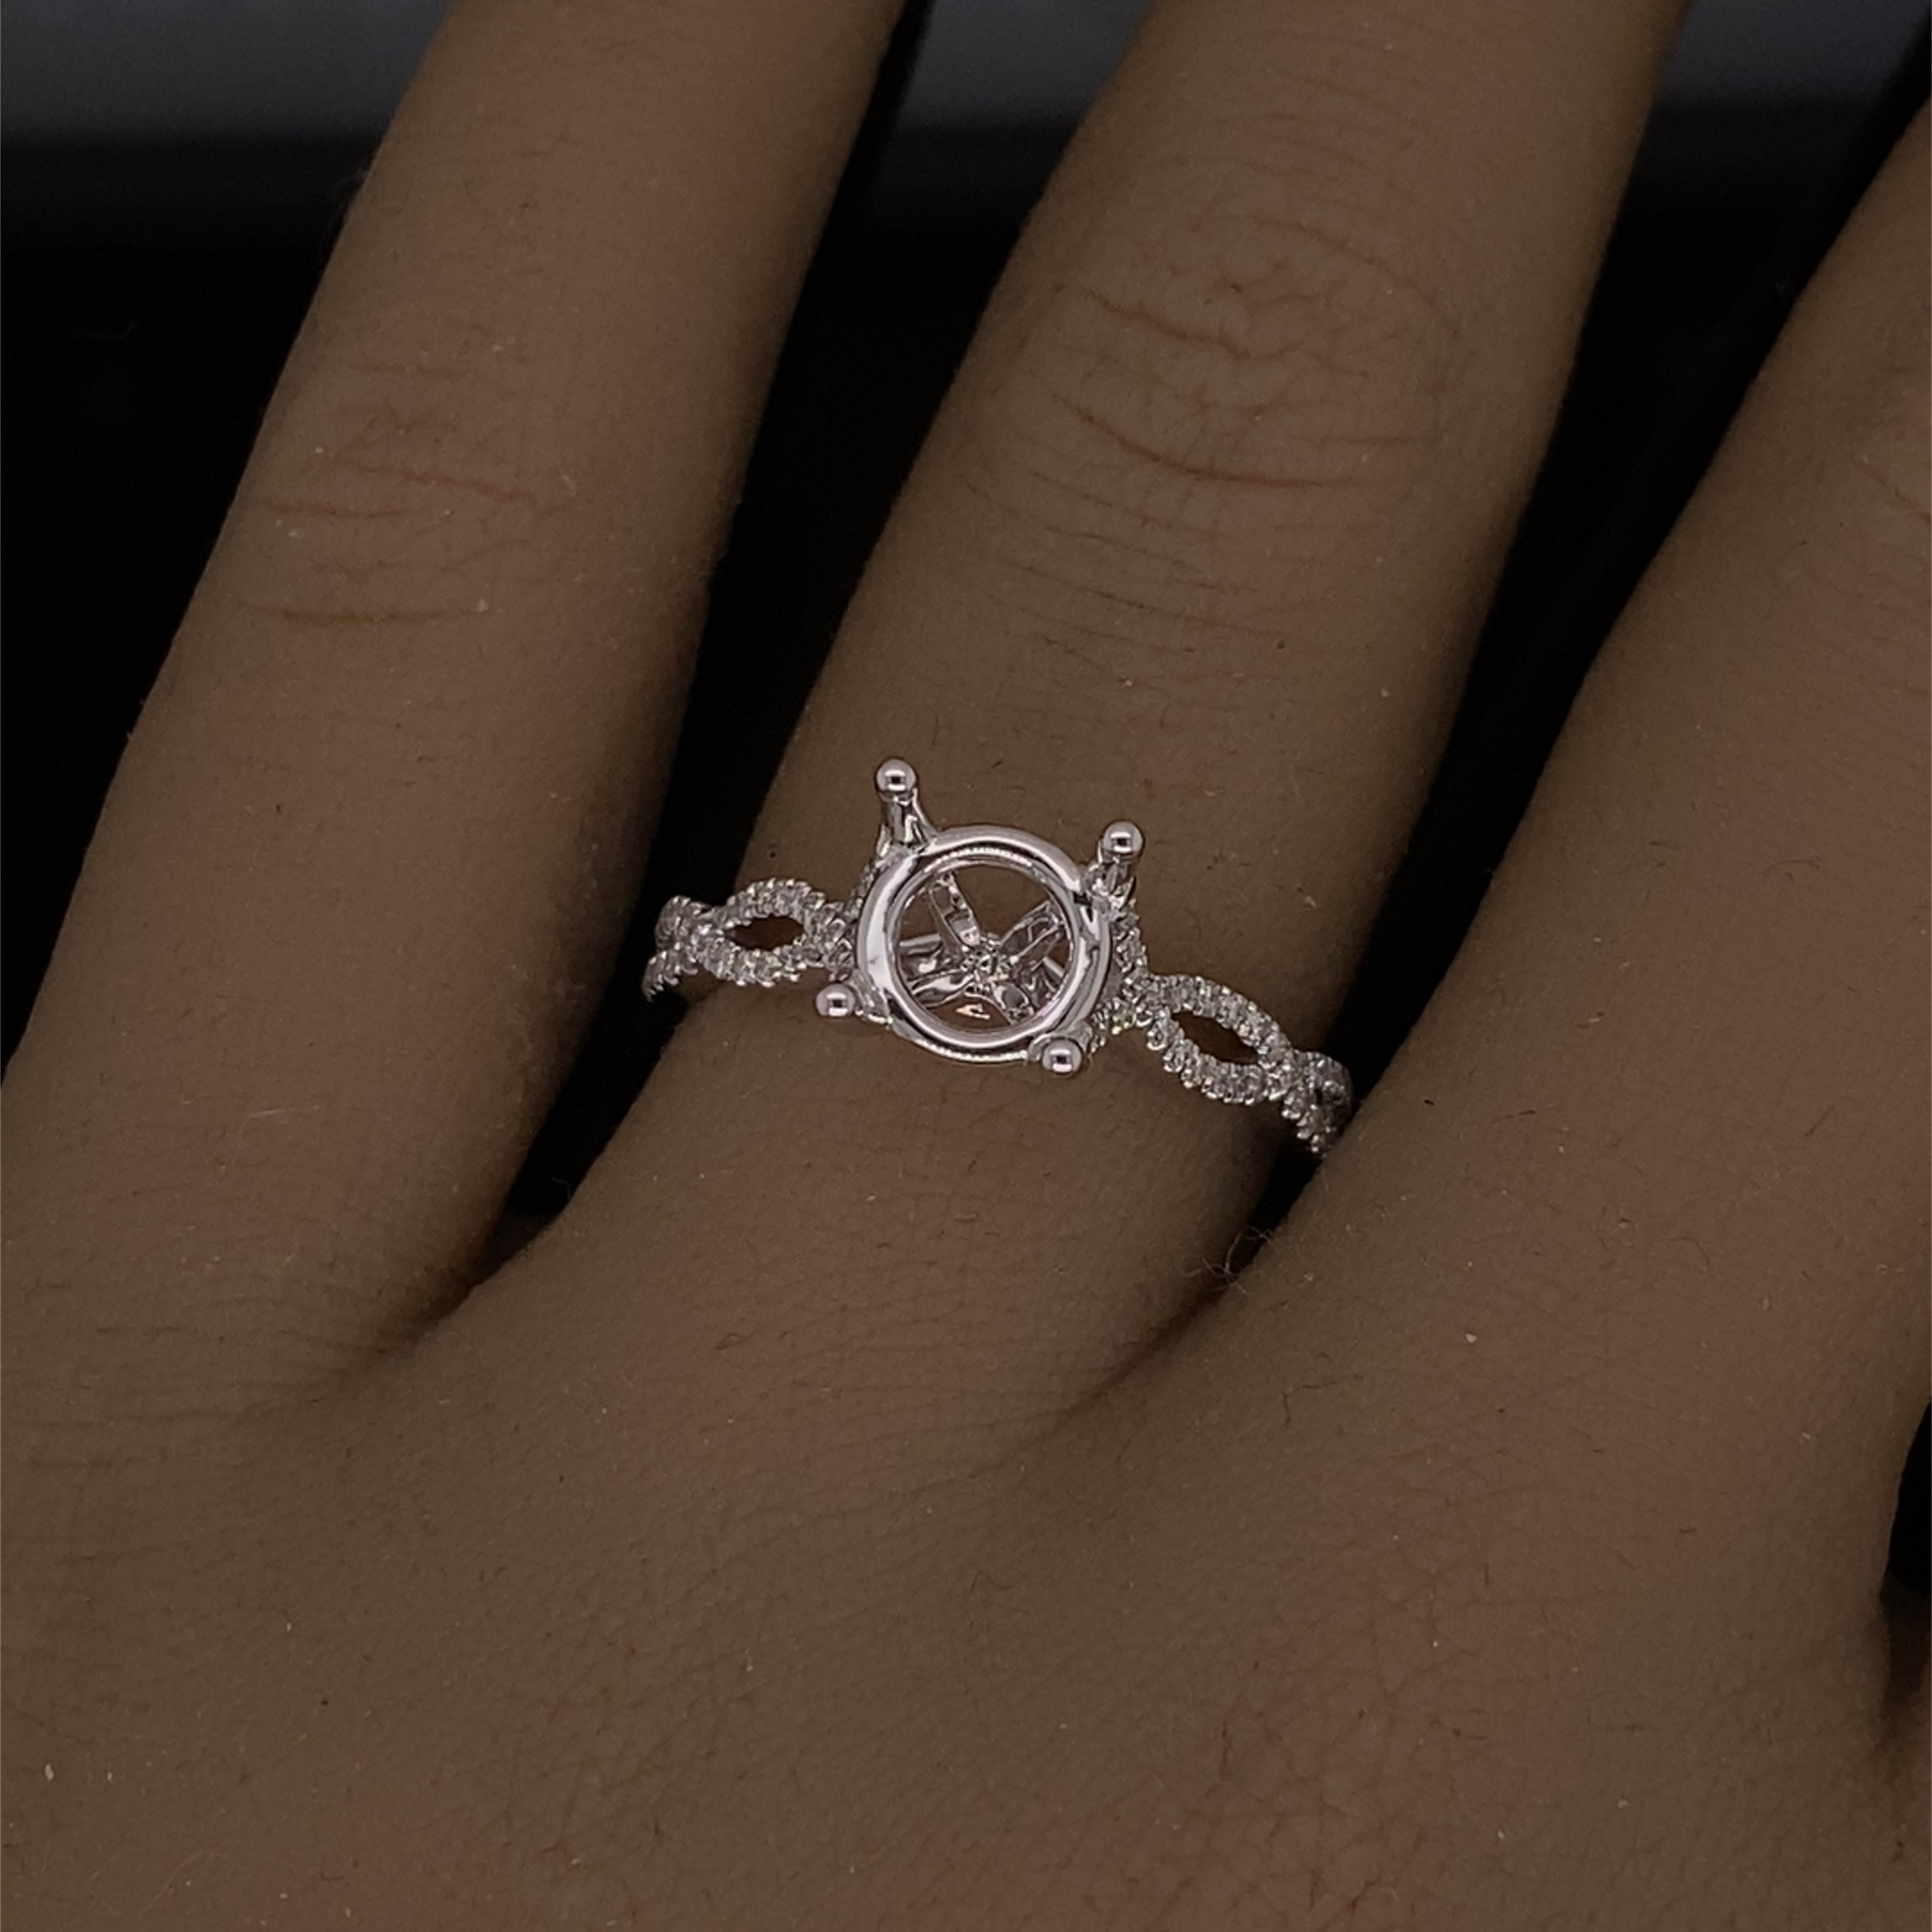 Chic Split Band Style Engagement Ring Setting With Round Diamond Halo in  14k White Gold - Diamond & Design